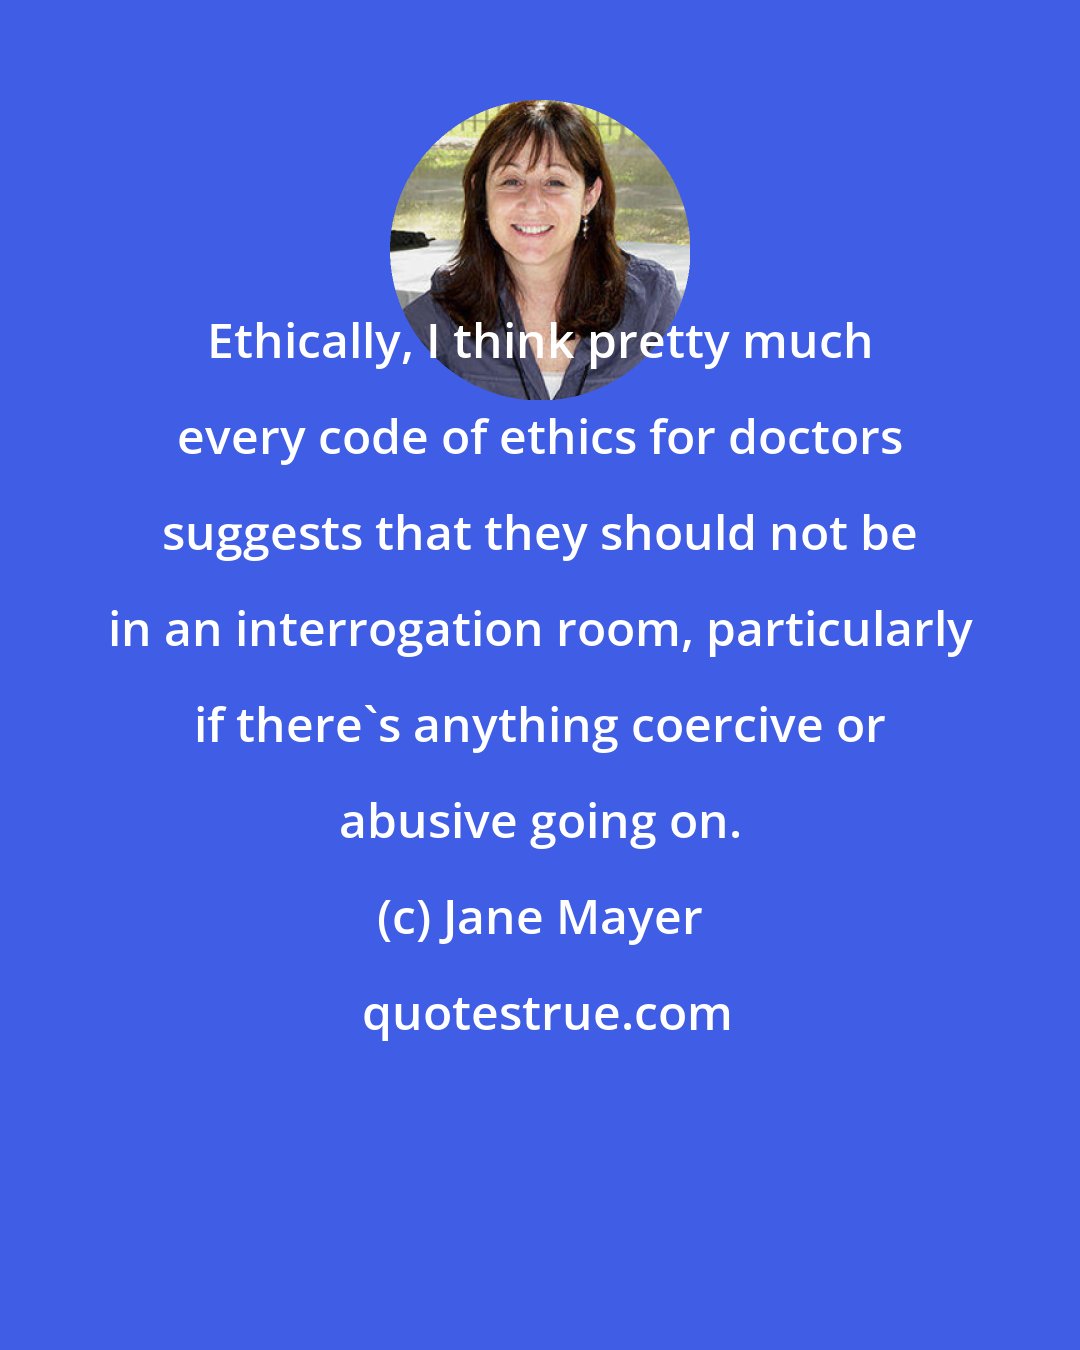 Jane Mayer: Ethically, I think pretty much every code of ethics for doctors suggests that they should not be in an interrogation room, particularly if there's anything coercive or abusive going on.